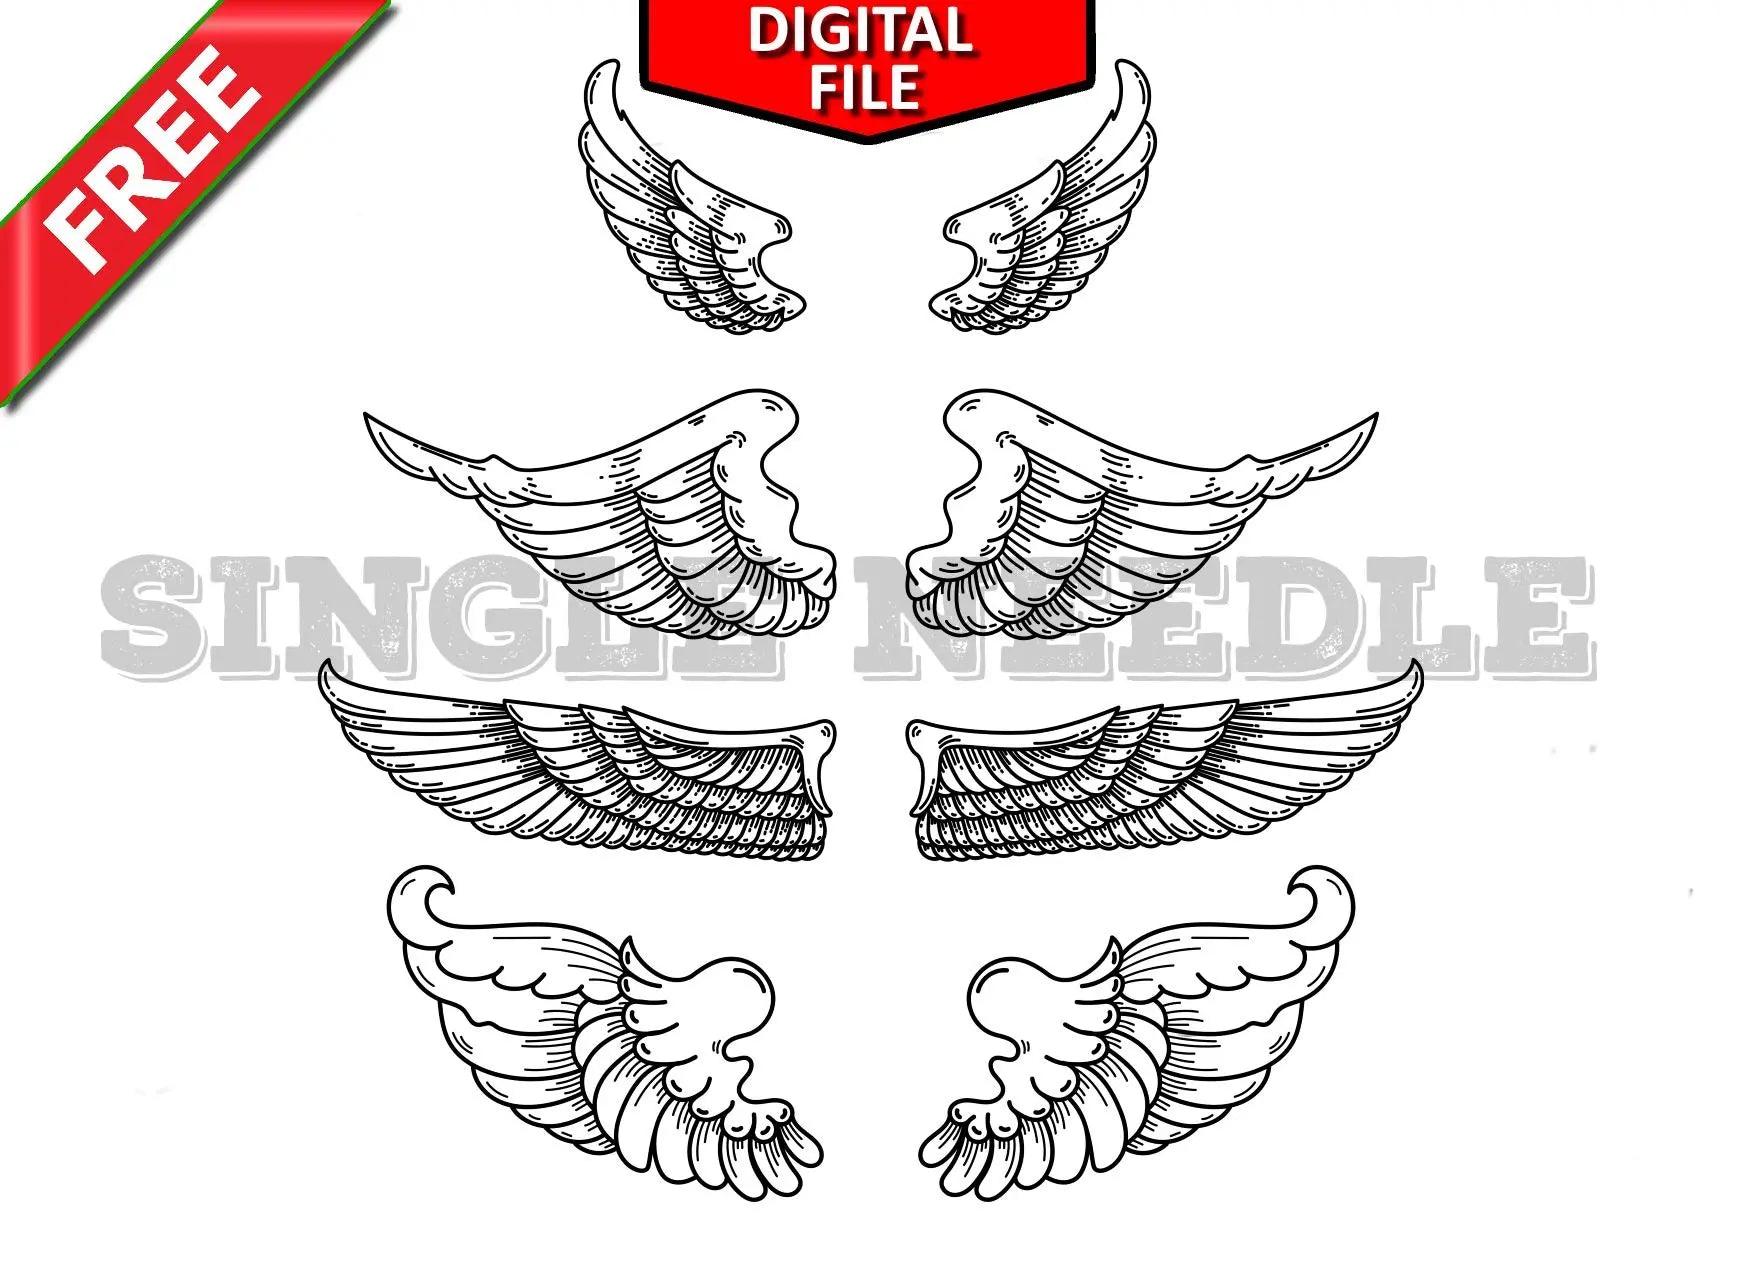 Angel Wings 2 Tattoo Flash Sheet Stencil for Real Stick and Poke Tattoos - FREE DOWNLOAD - SINGLE NEEDLE